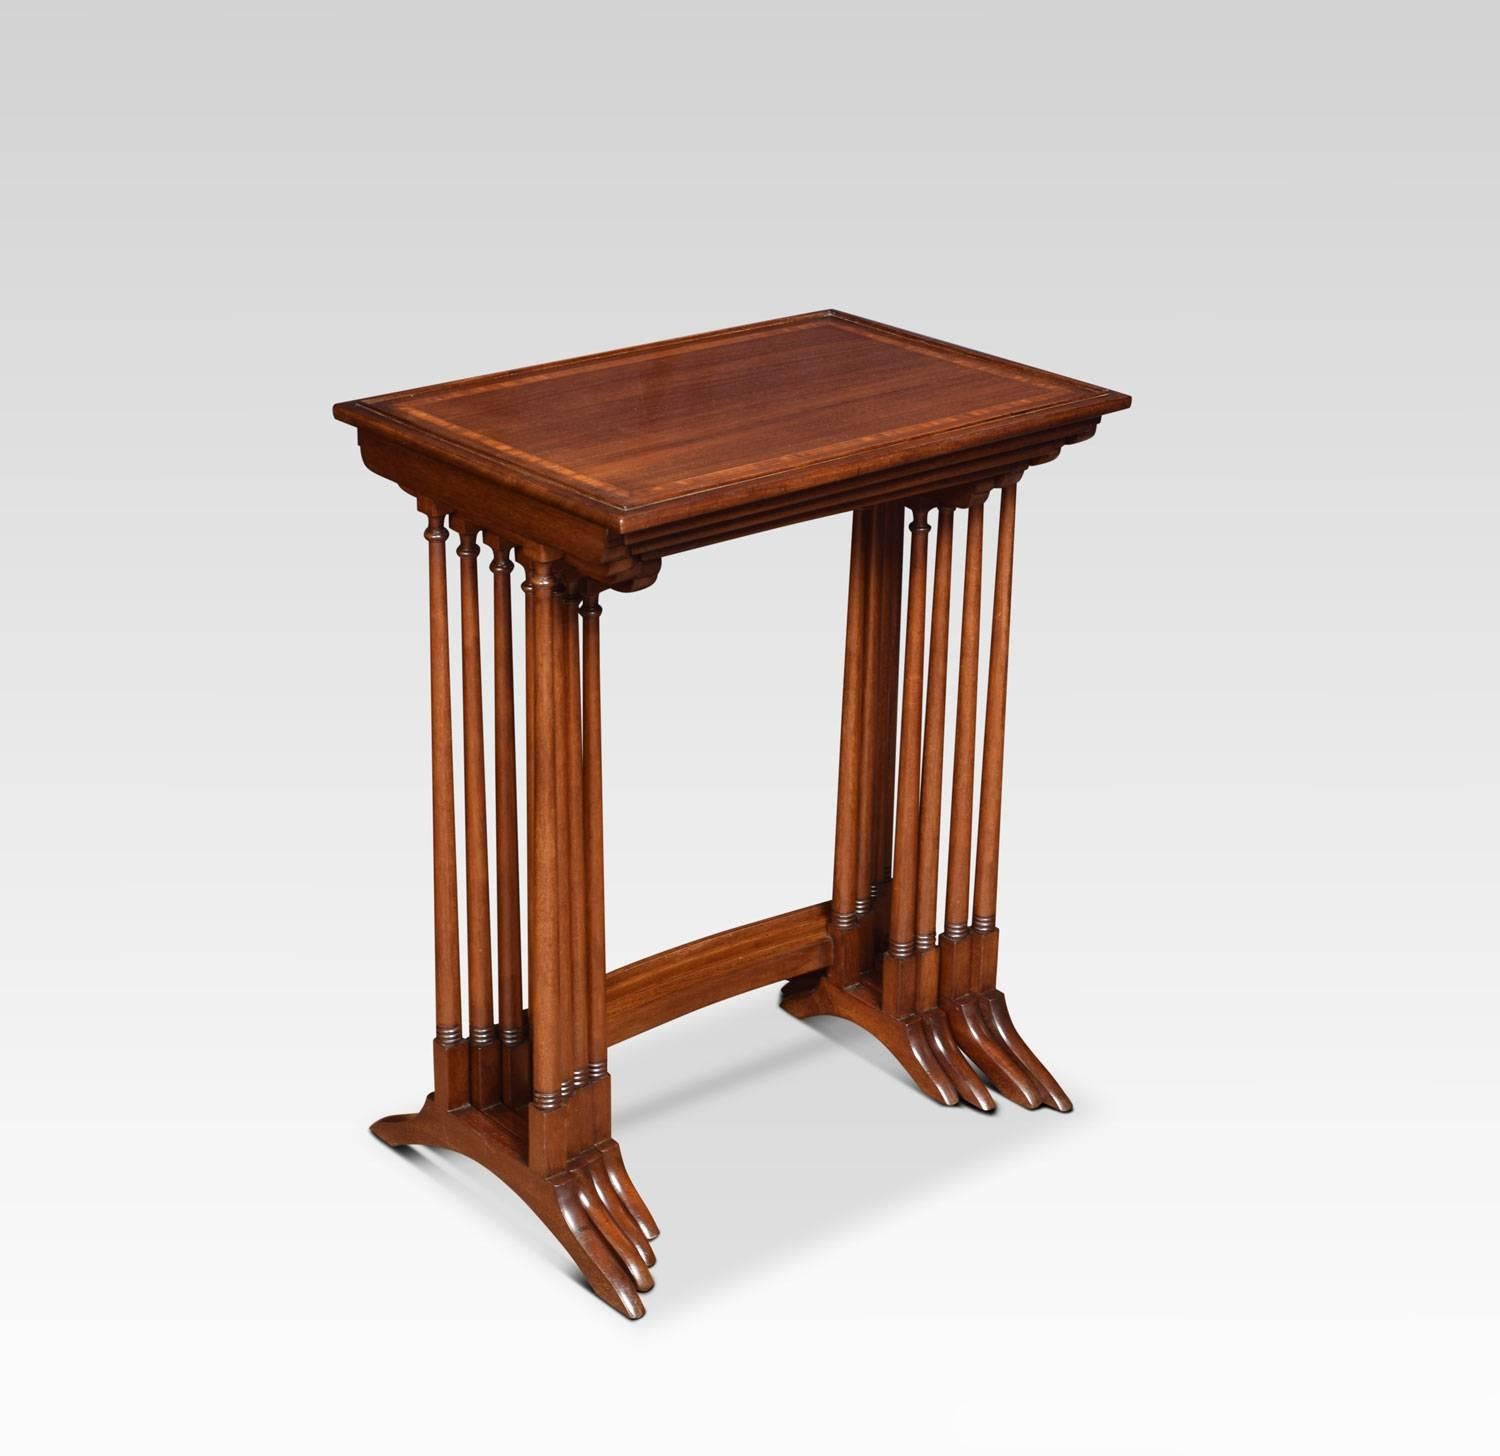 Quartet nest of mahogany tables, the rectangular moulded tops with satinwood inlaid boarder, raised on slender turned tapered supports terminating in splayed feet.
Dimensions
Height 27.5 inches
Width 22 inches
Depth 15 inches.